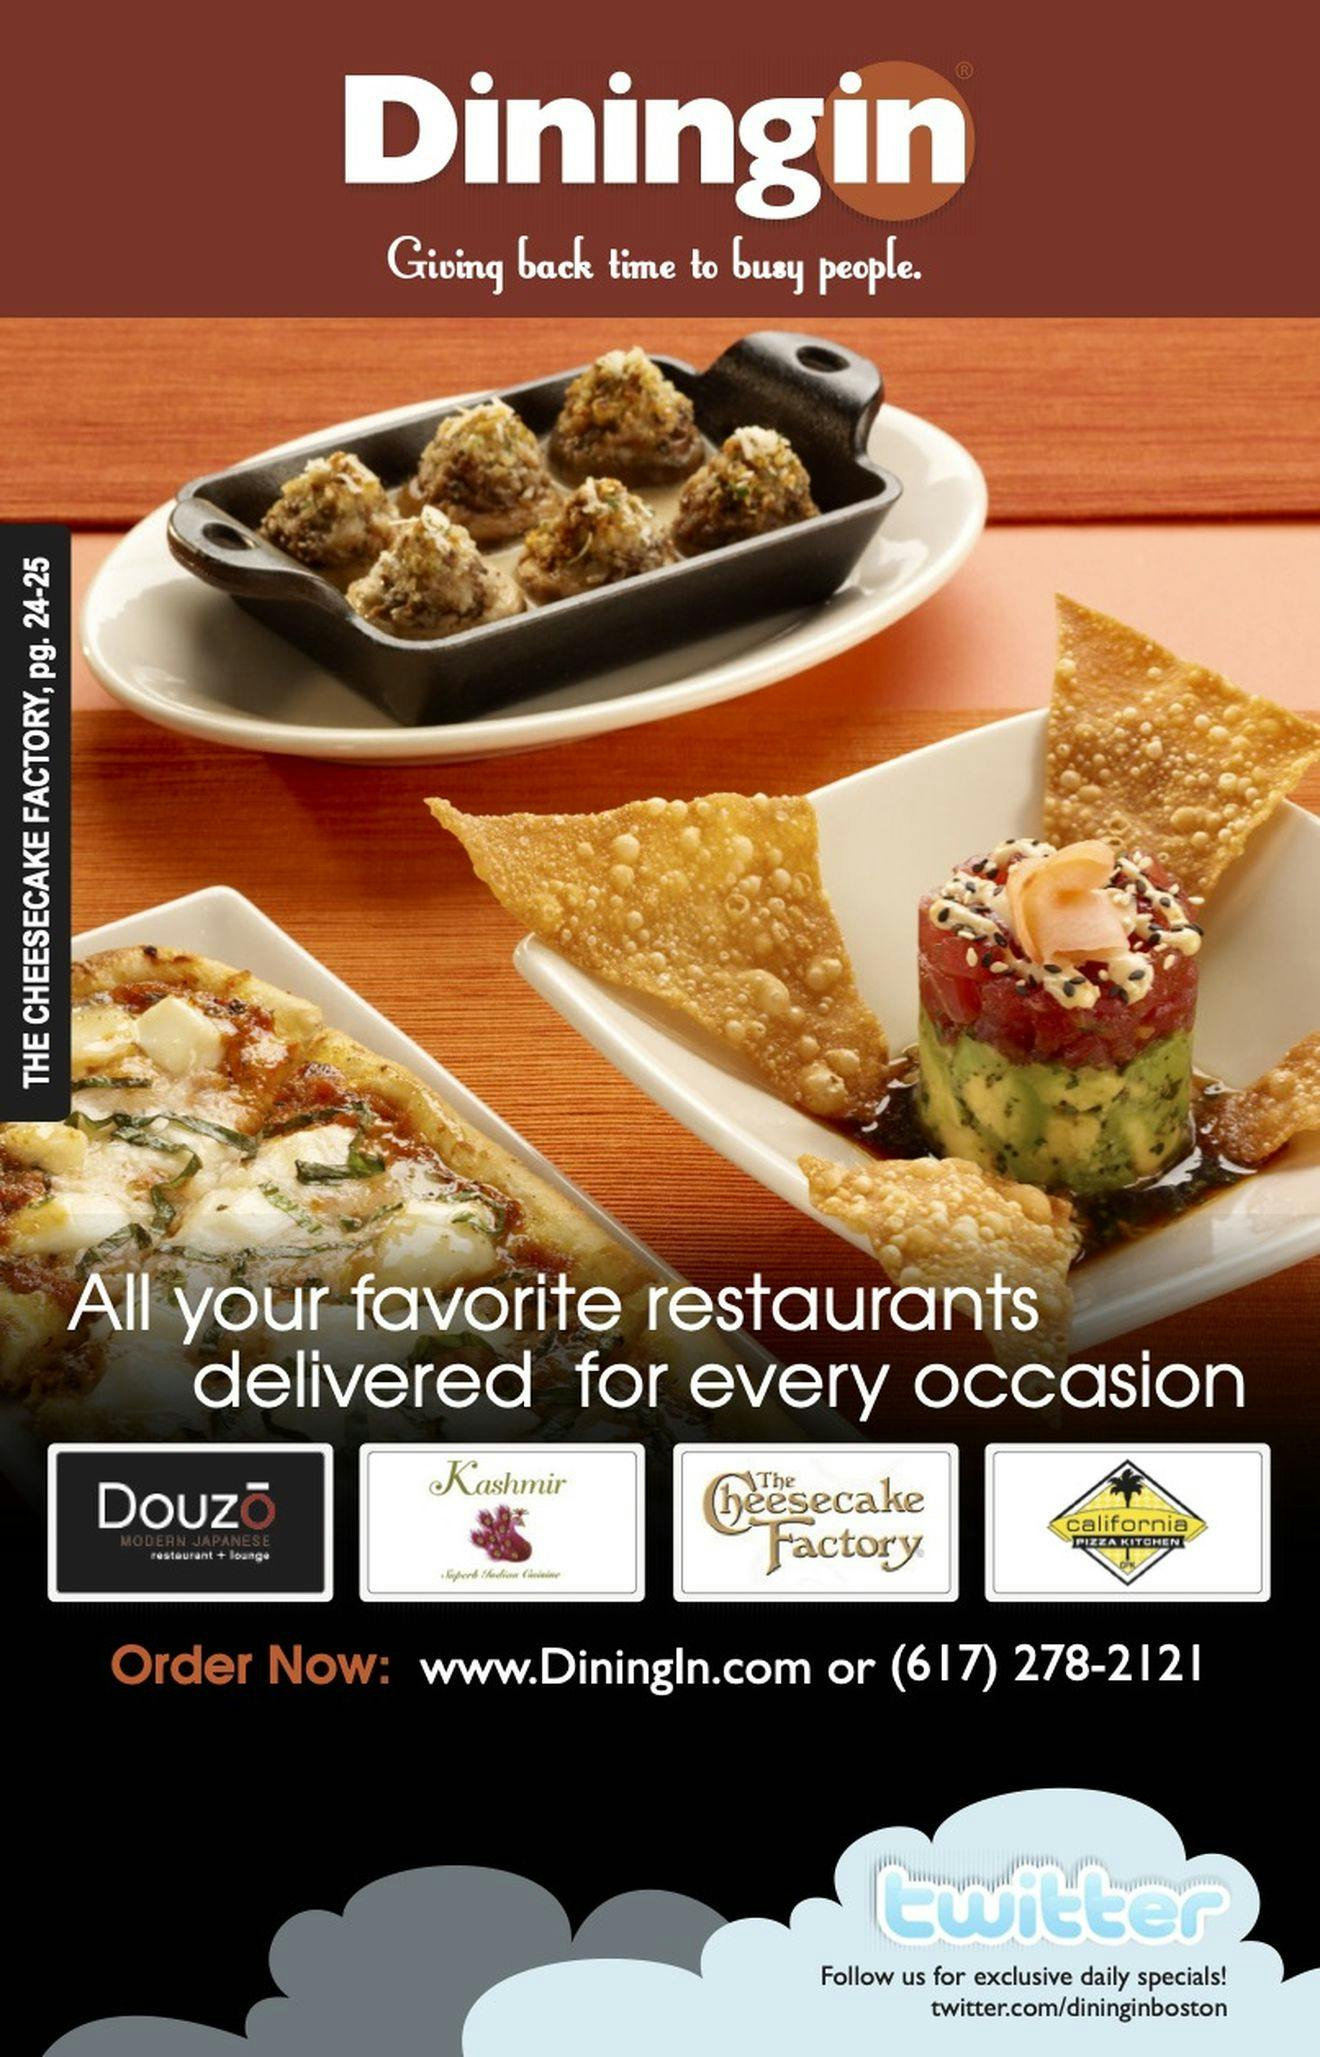 Front cover of a DiningIn direct mailer featuring many restaurants and menus that DiningIn partnered with for food delivery.